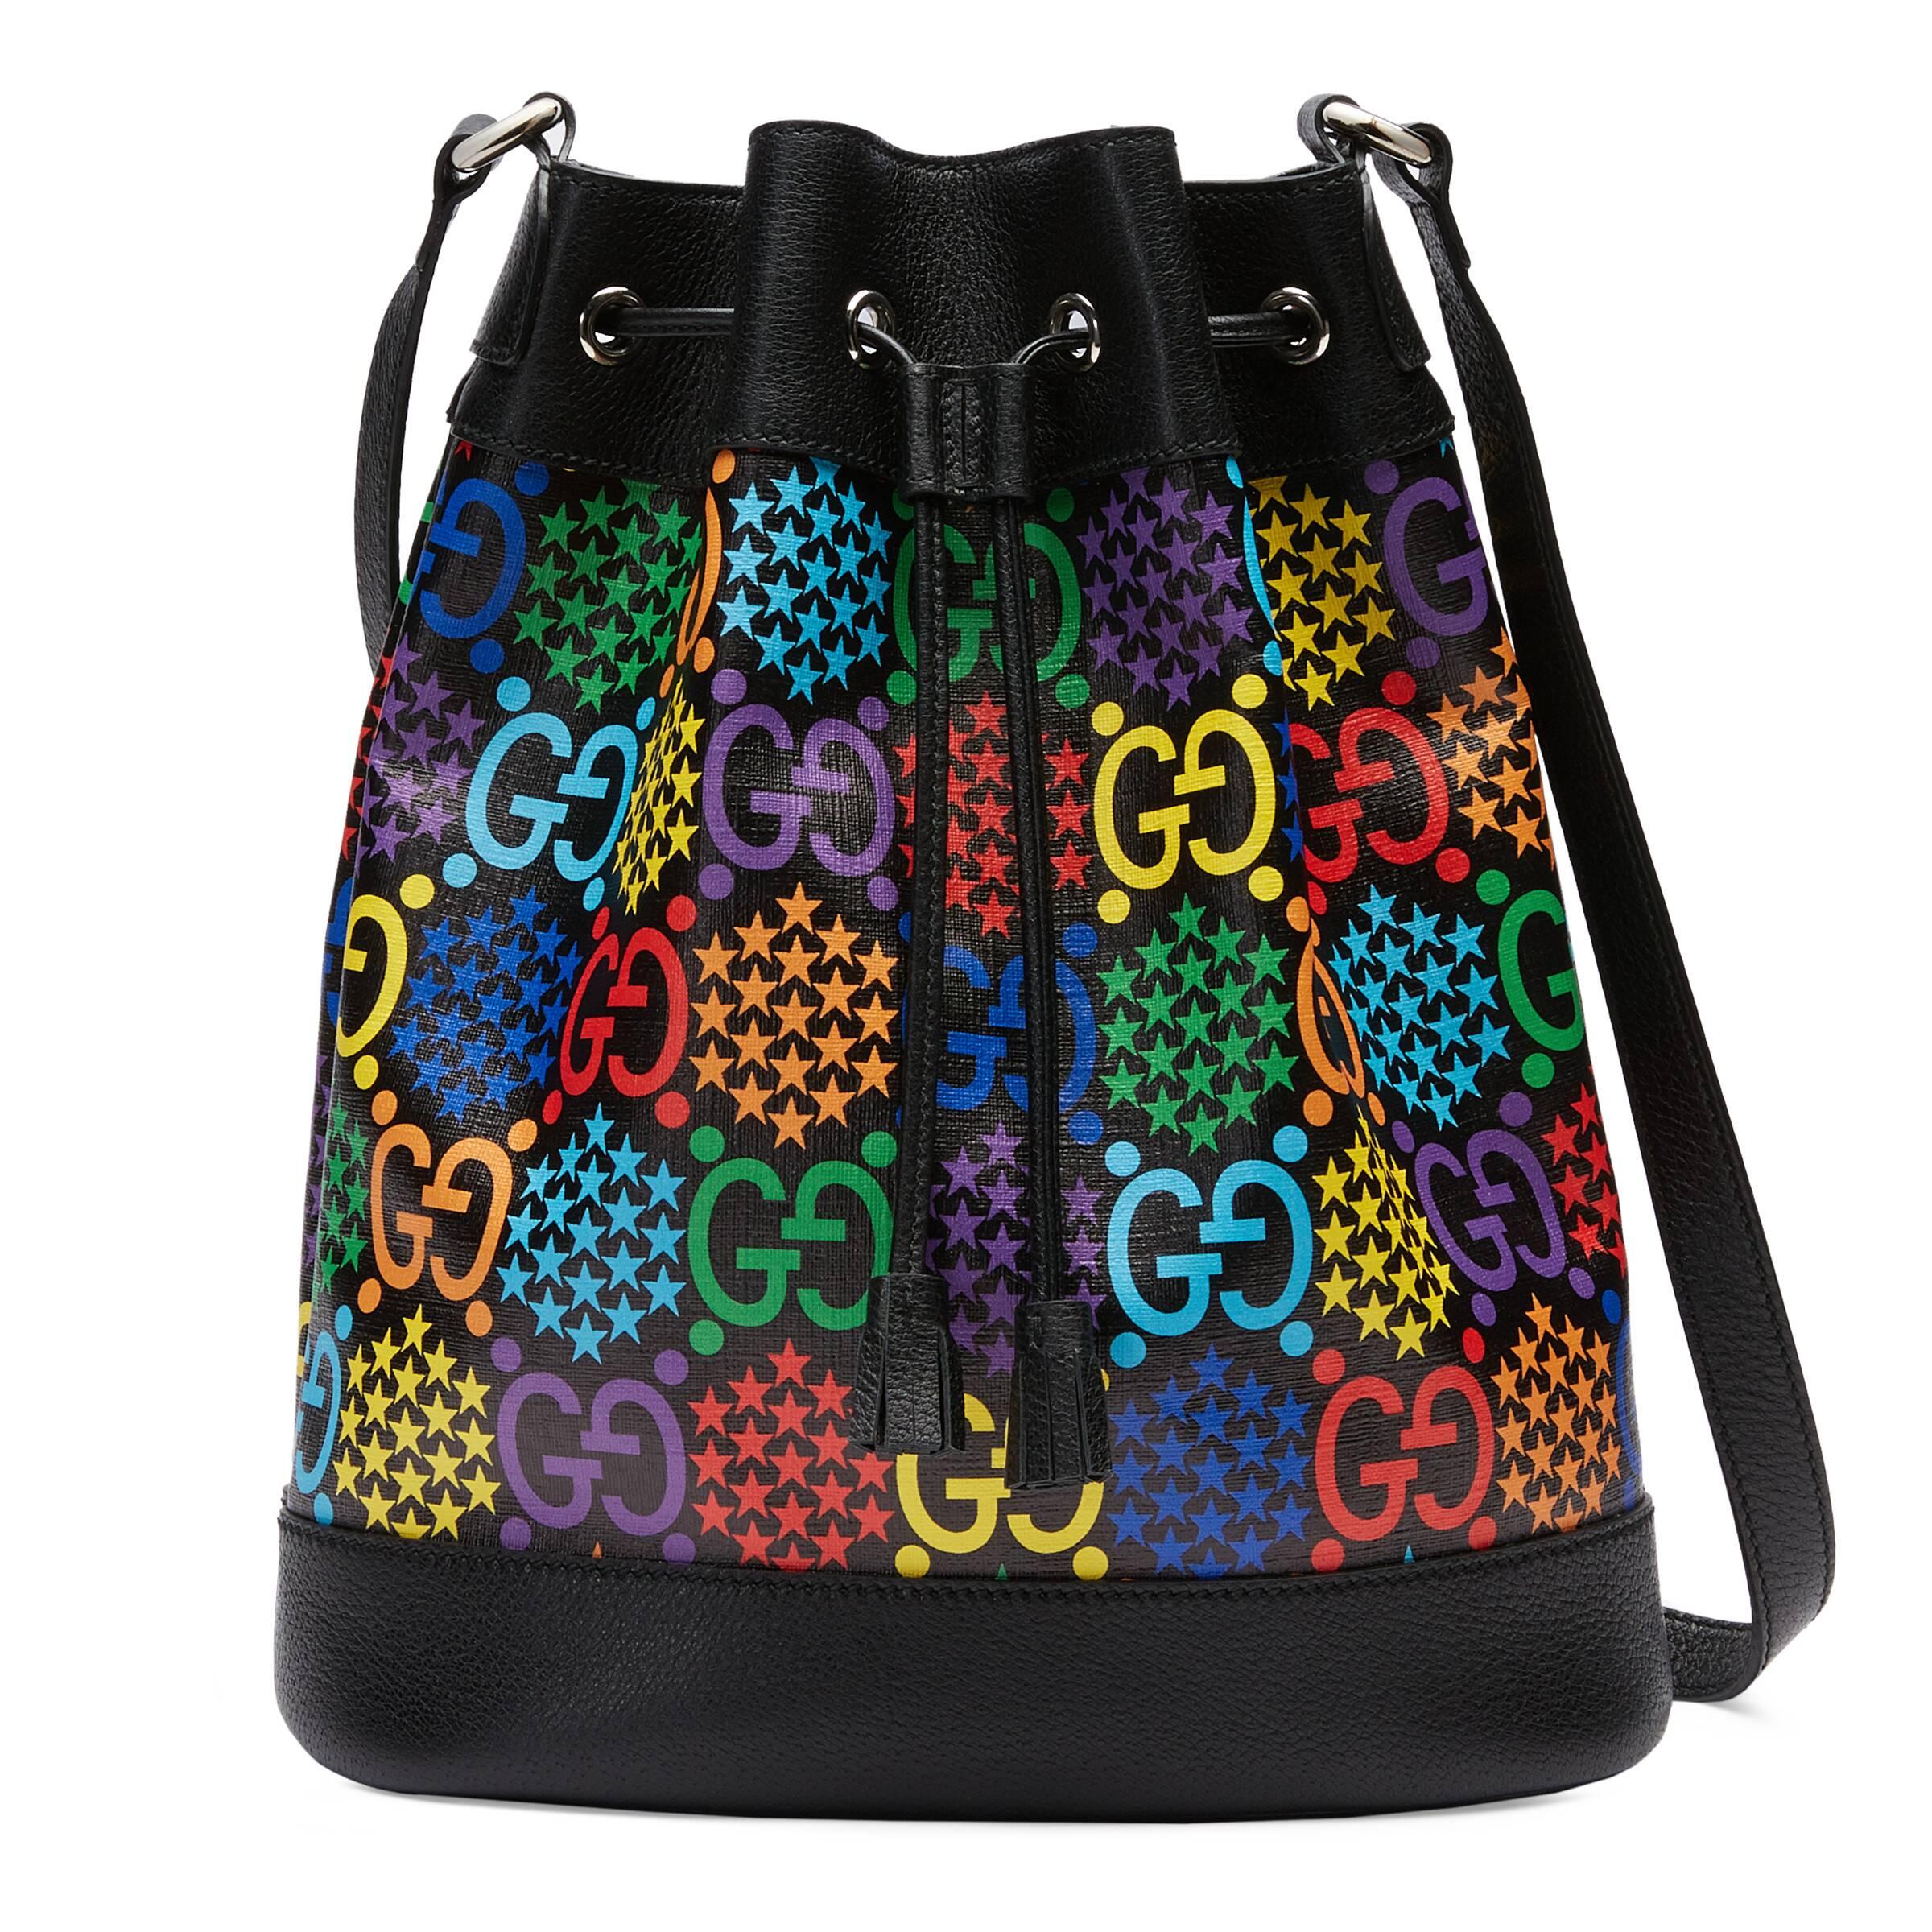 Authenticated used Gucci Gucci GG Psychedelic Bucket Bag Shoulder 598149 PVC Leather Black Multicolor Pink Drawstring, Adult Unisex, Size: (HxWxD)